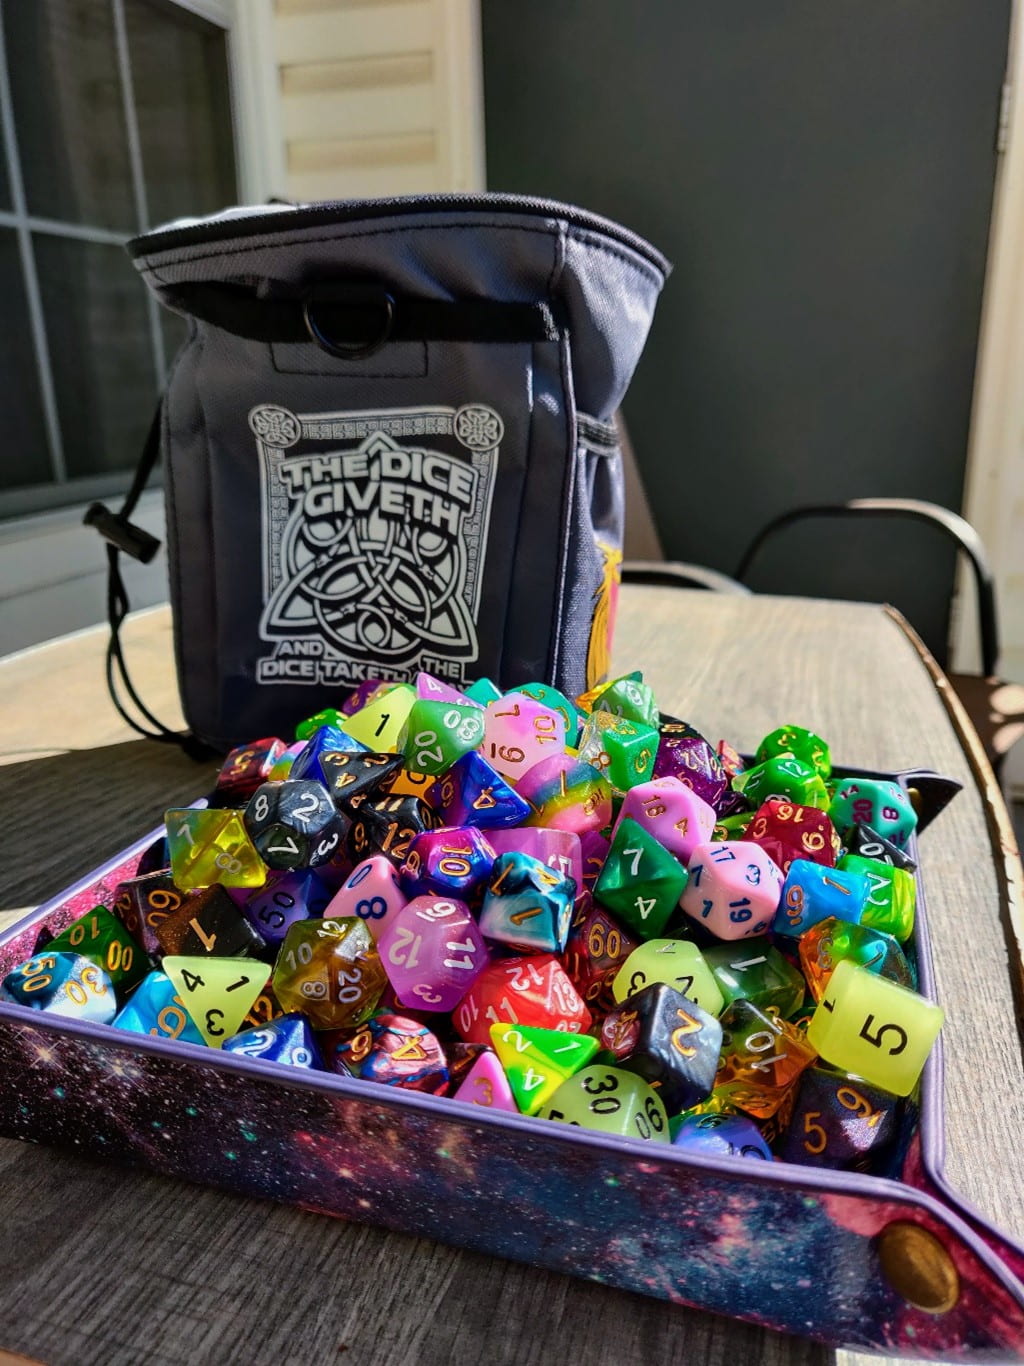 A small leather bag on a table with the words "The Dice Giveth and the Dice Taketh." A small container in front of it holds a large number of dice of all shapes and colors.